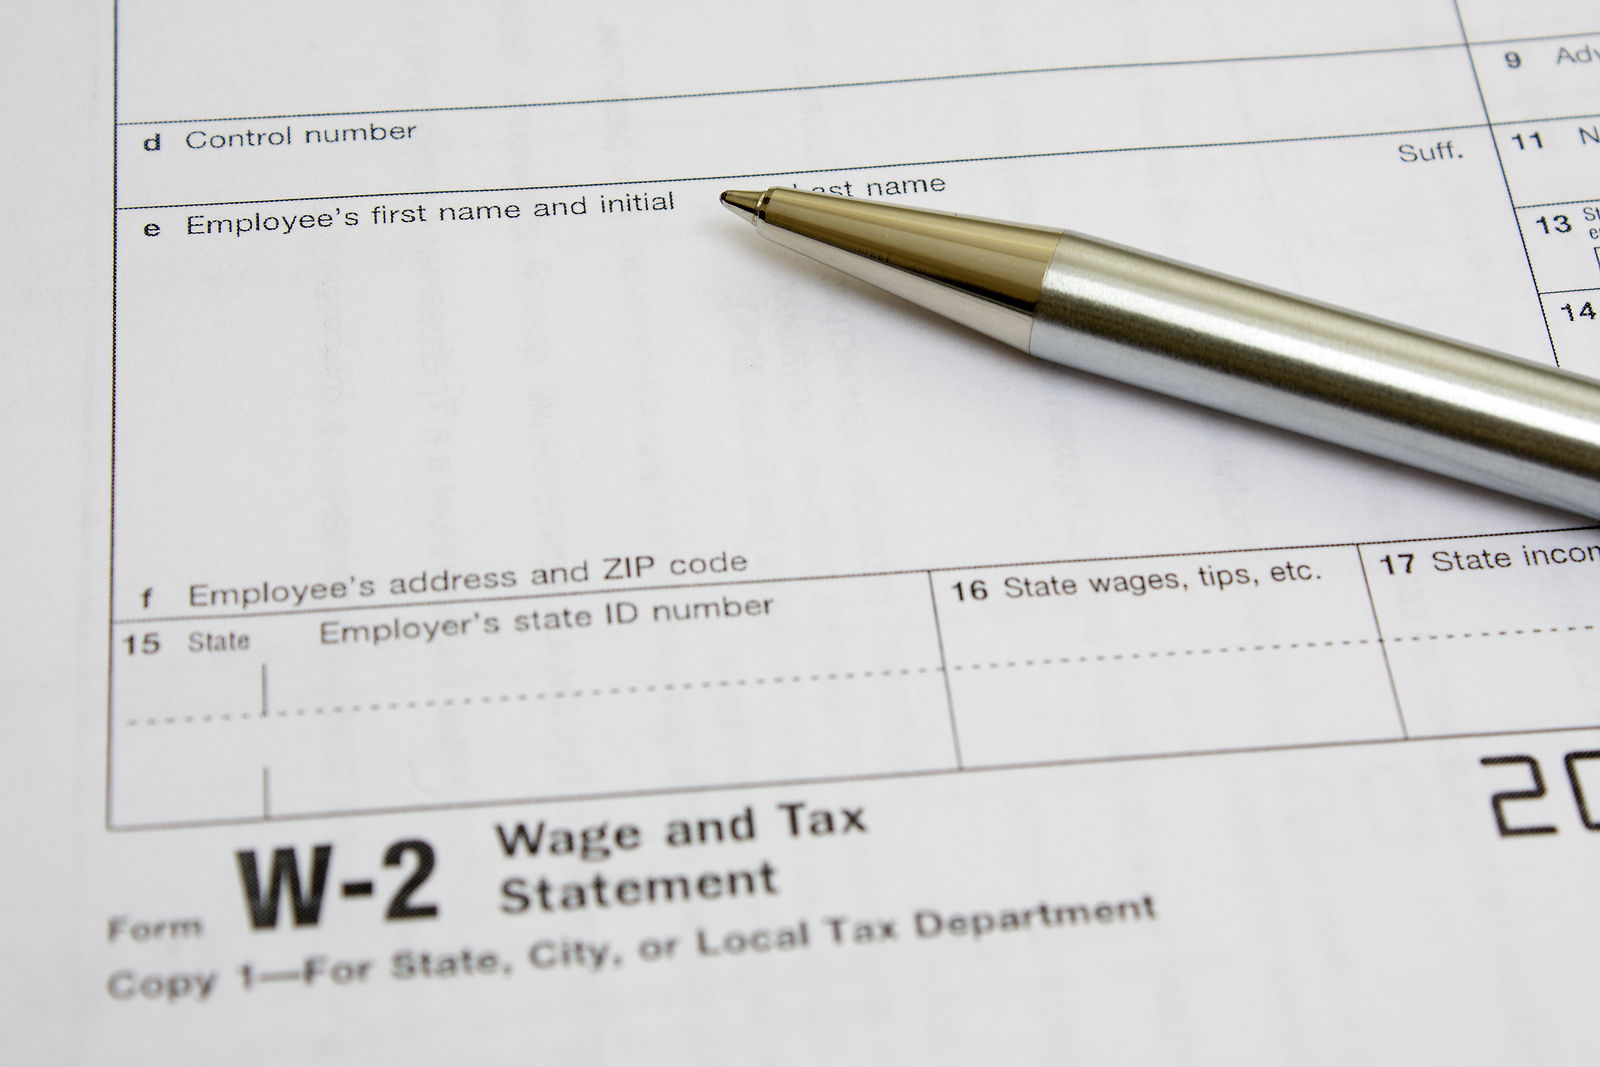 How To Get Your Old Irs Forms W-2 And 1099Getting Irs with How To Obtain Old W2 Forms From Irs